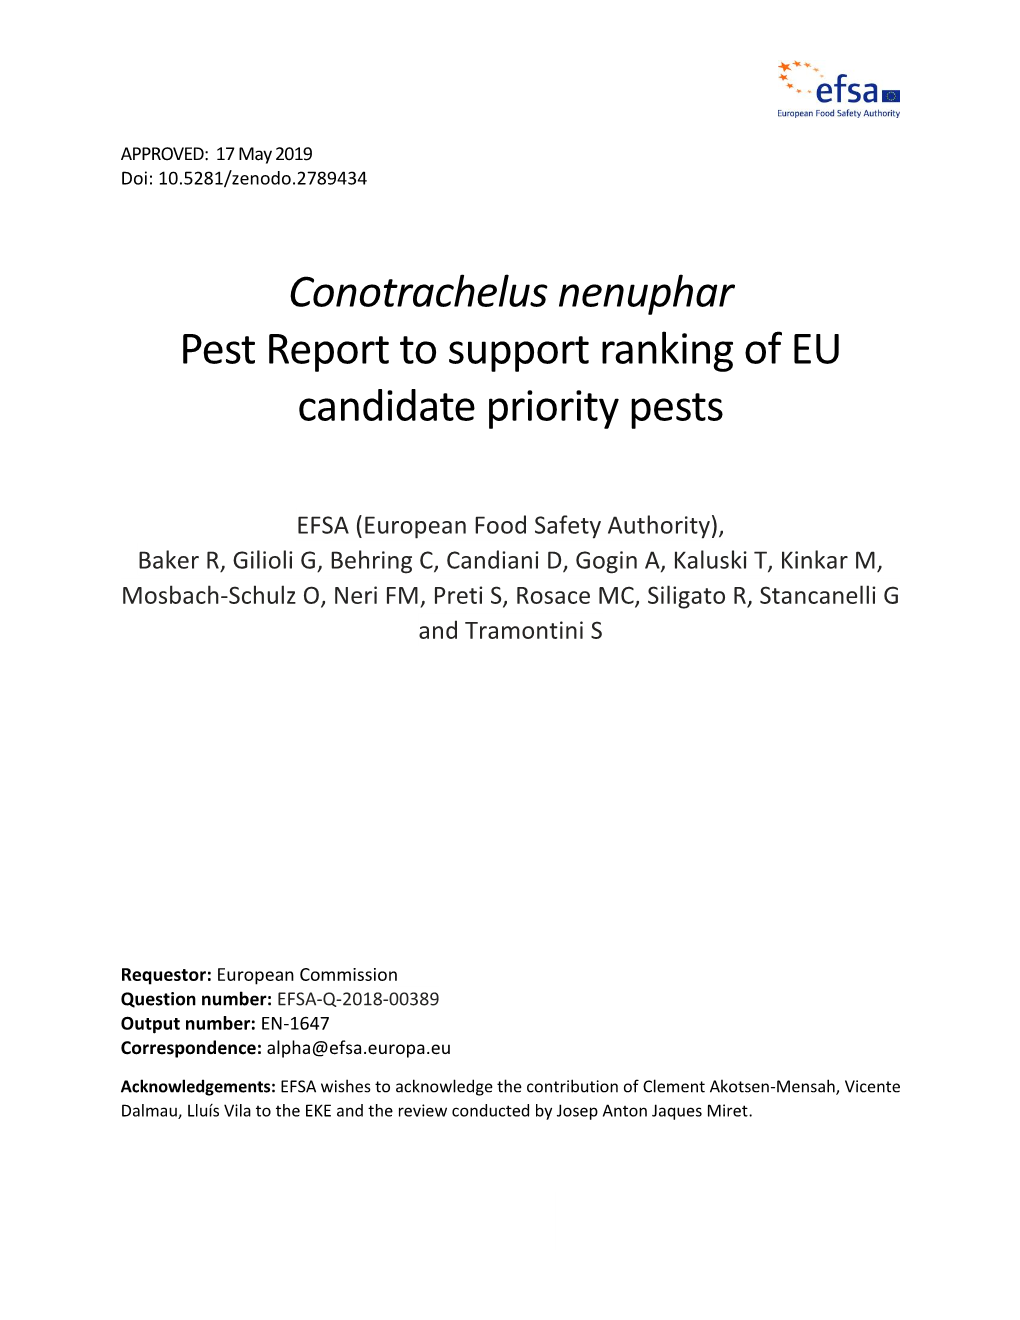 Conotrachelus Nenuphar Pest Report to Support Ranking of EU Candidate Priority Pests